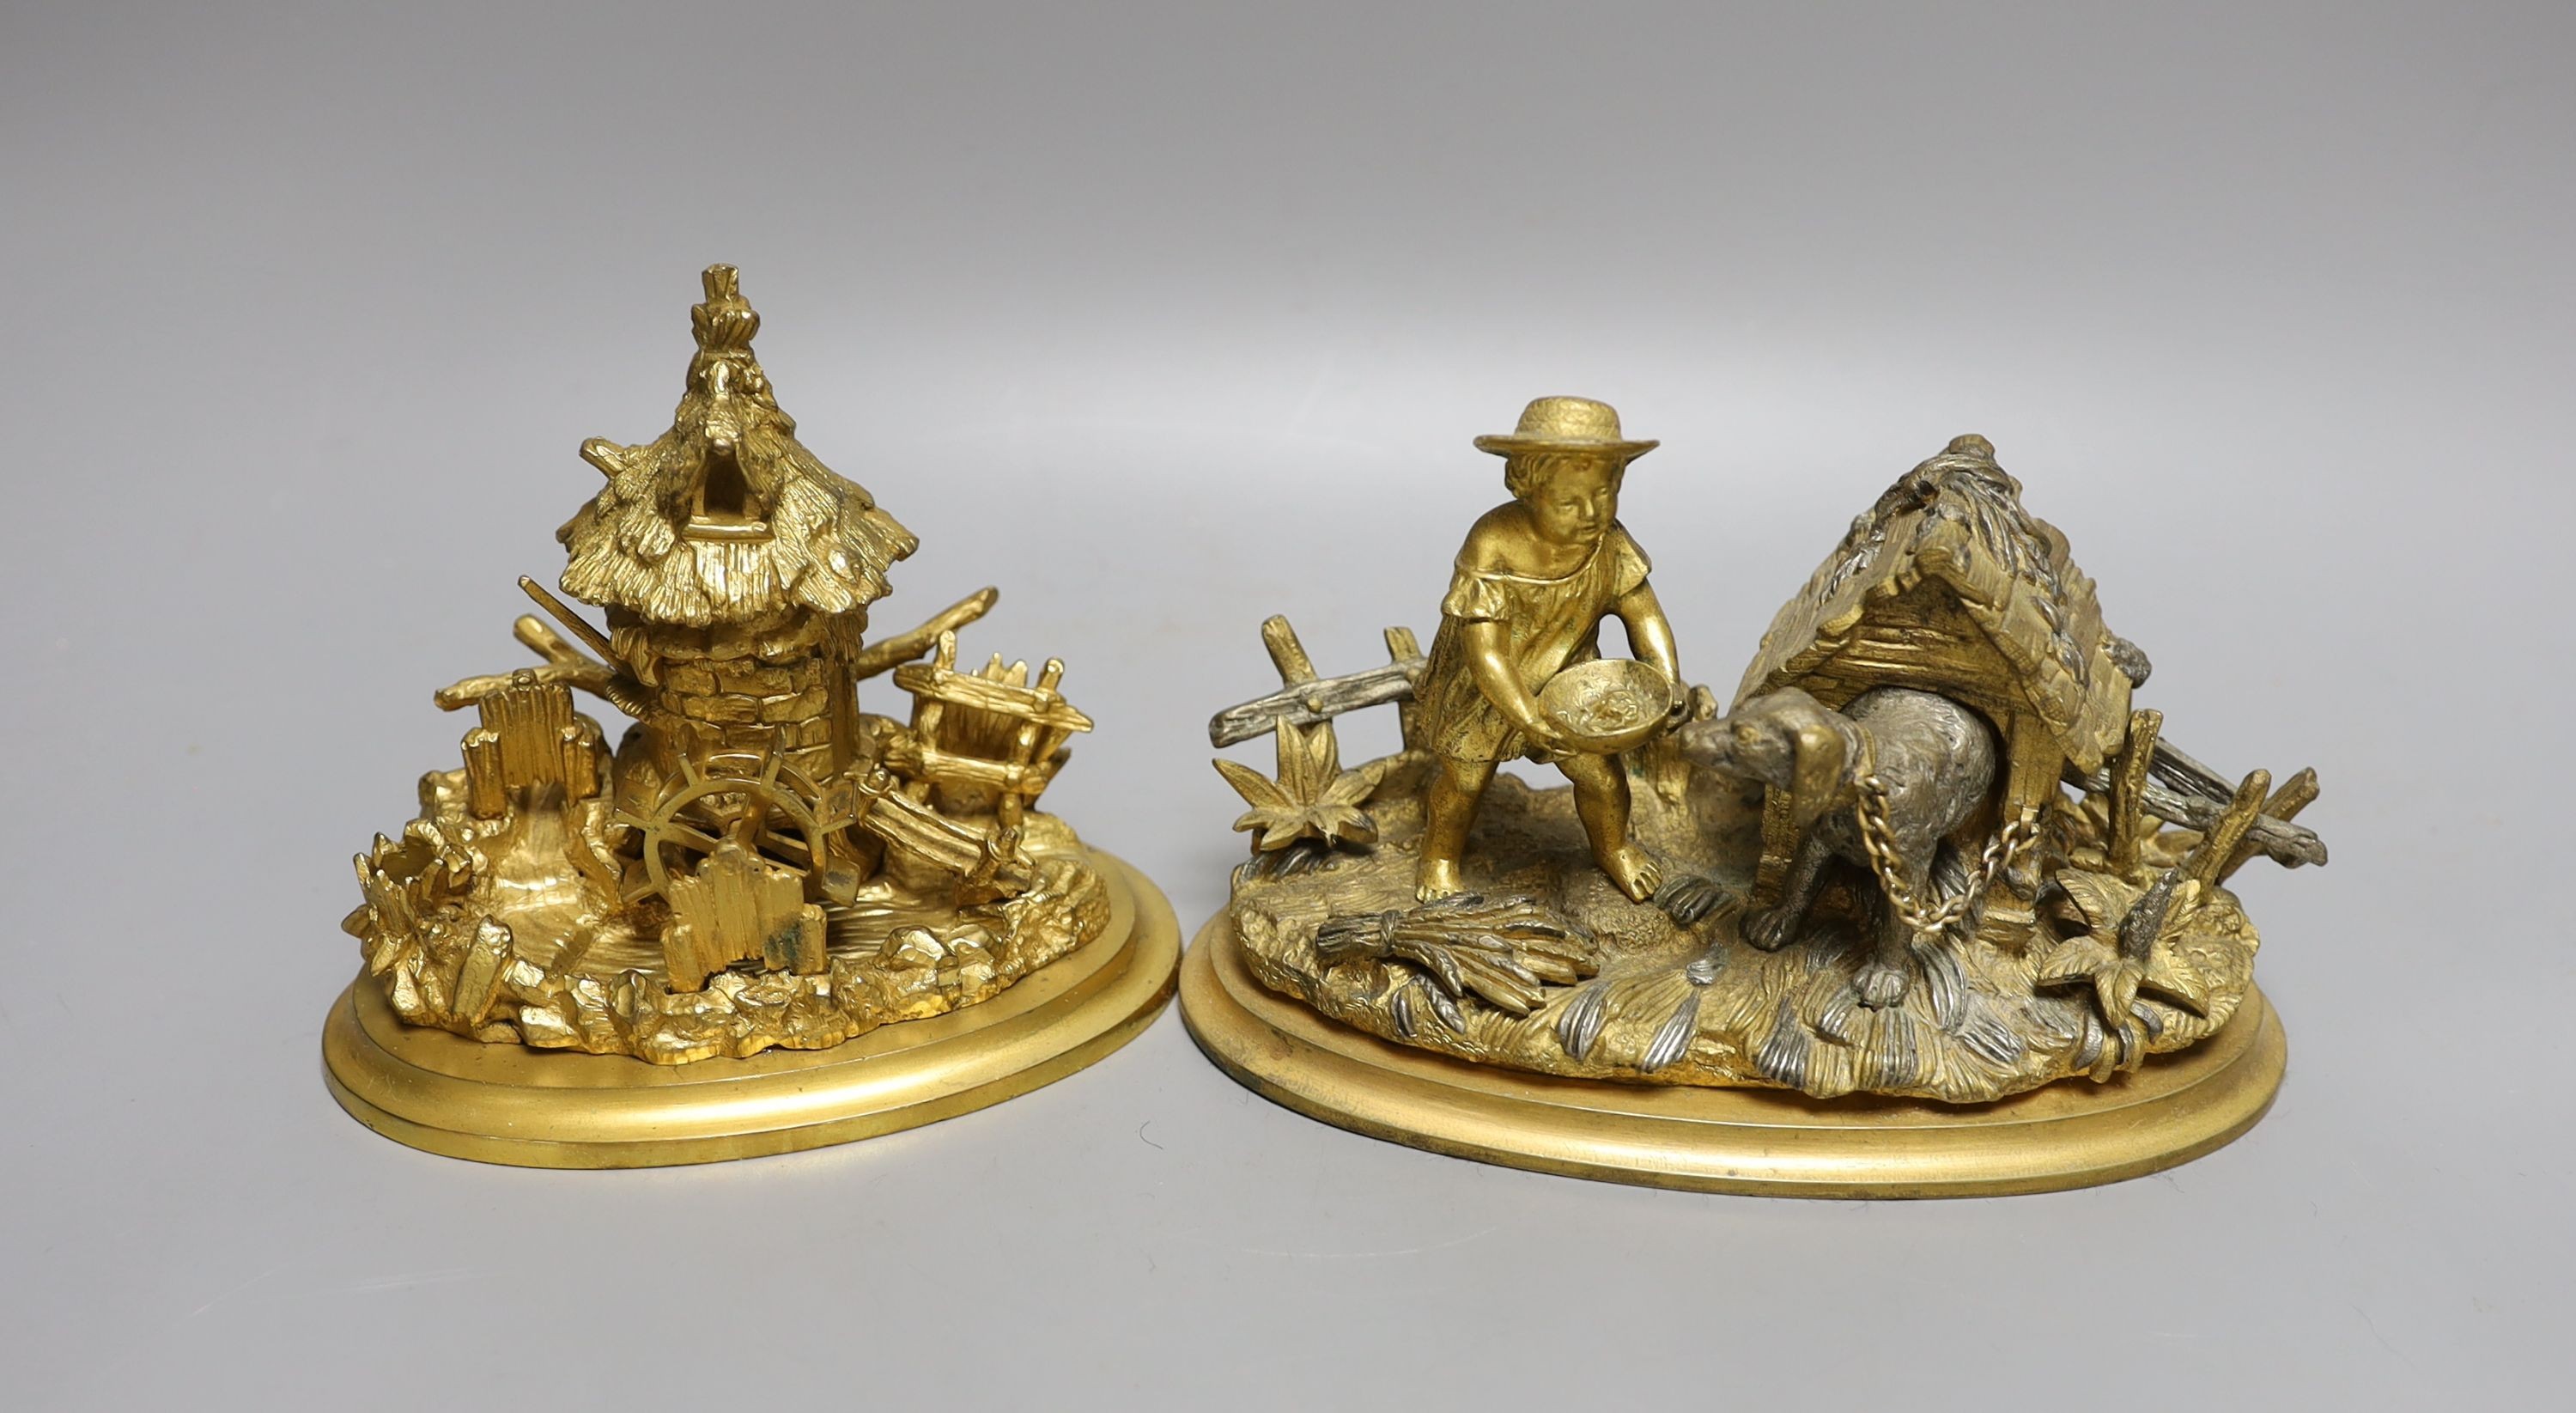 Two 19th century ormolu inkwells, modelled as a dog in a kennel, a water mill together with a chamberstick